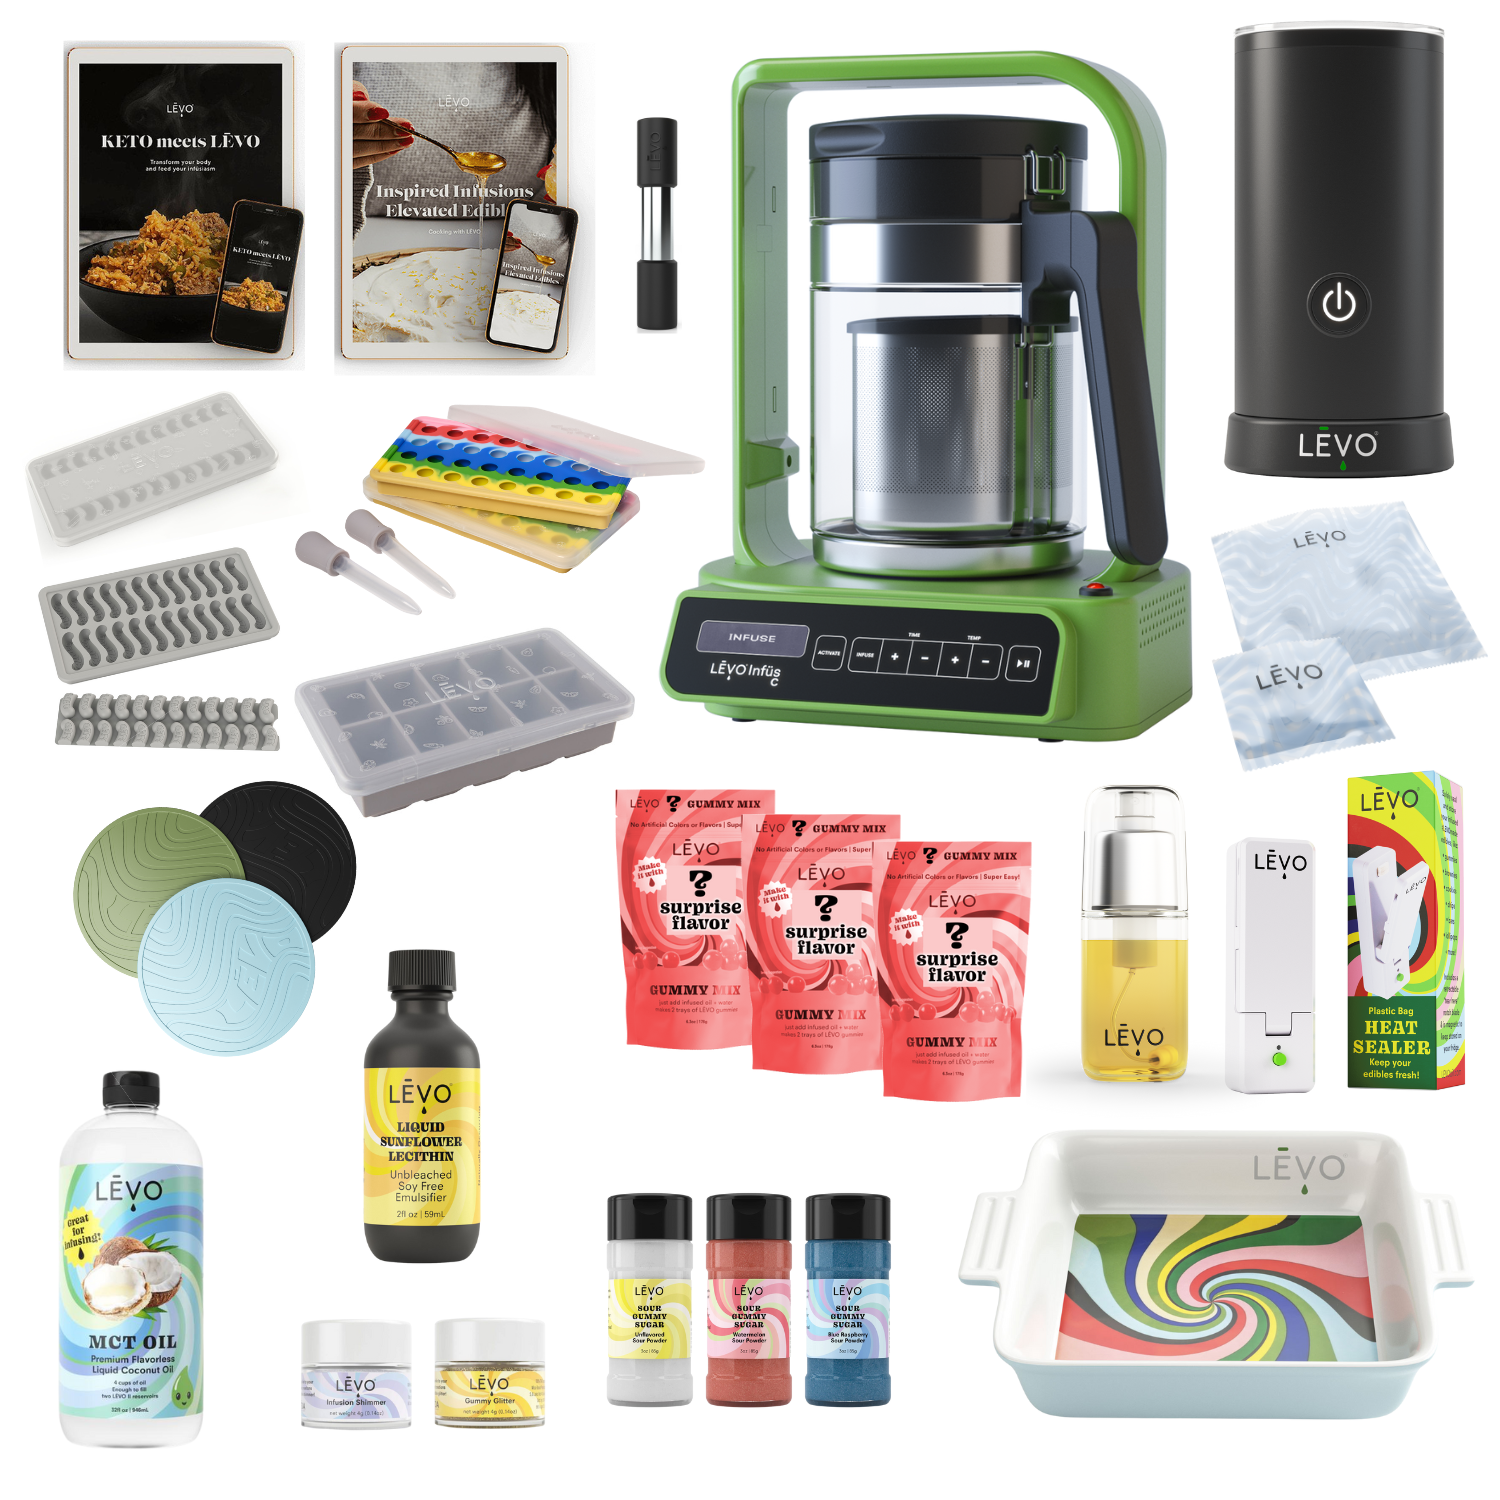 The LEVO C Kitchen Sink Bundle features everything you need to make herbal infusions and edibles at home, plus more!